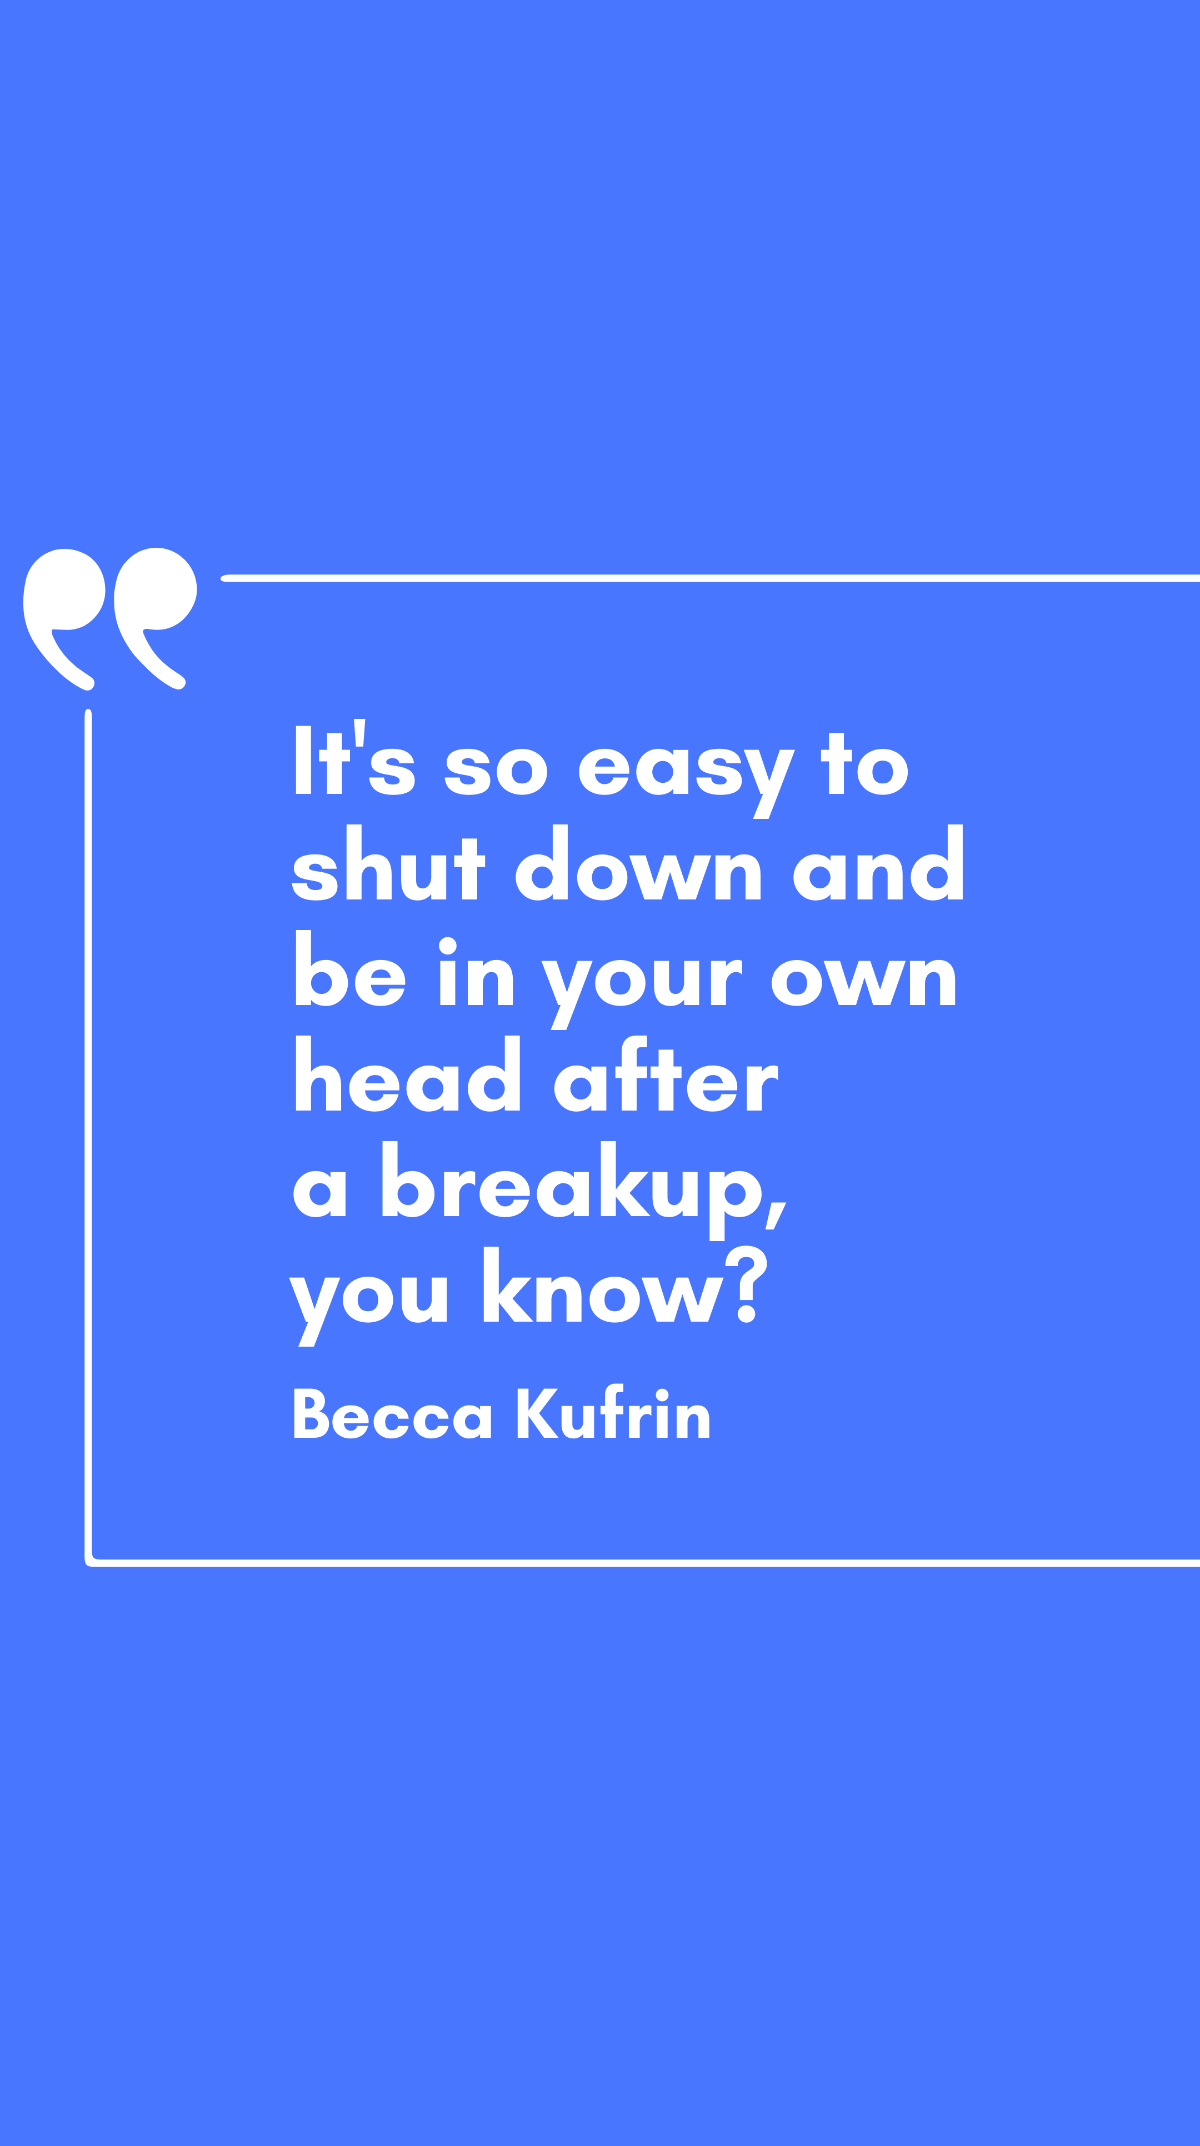 Becca Kufrin - It's so easy to shut down and be in your own head after a breakup, you know?